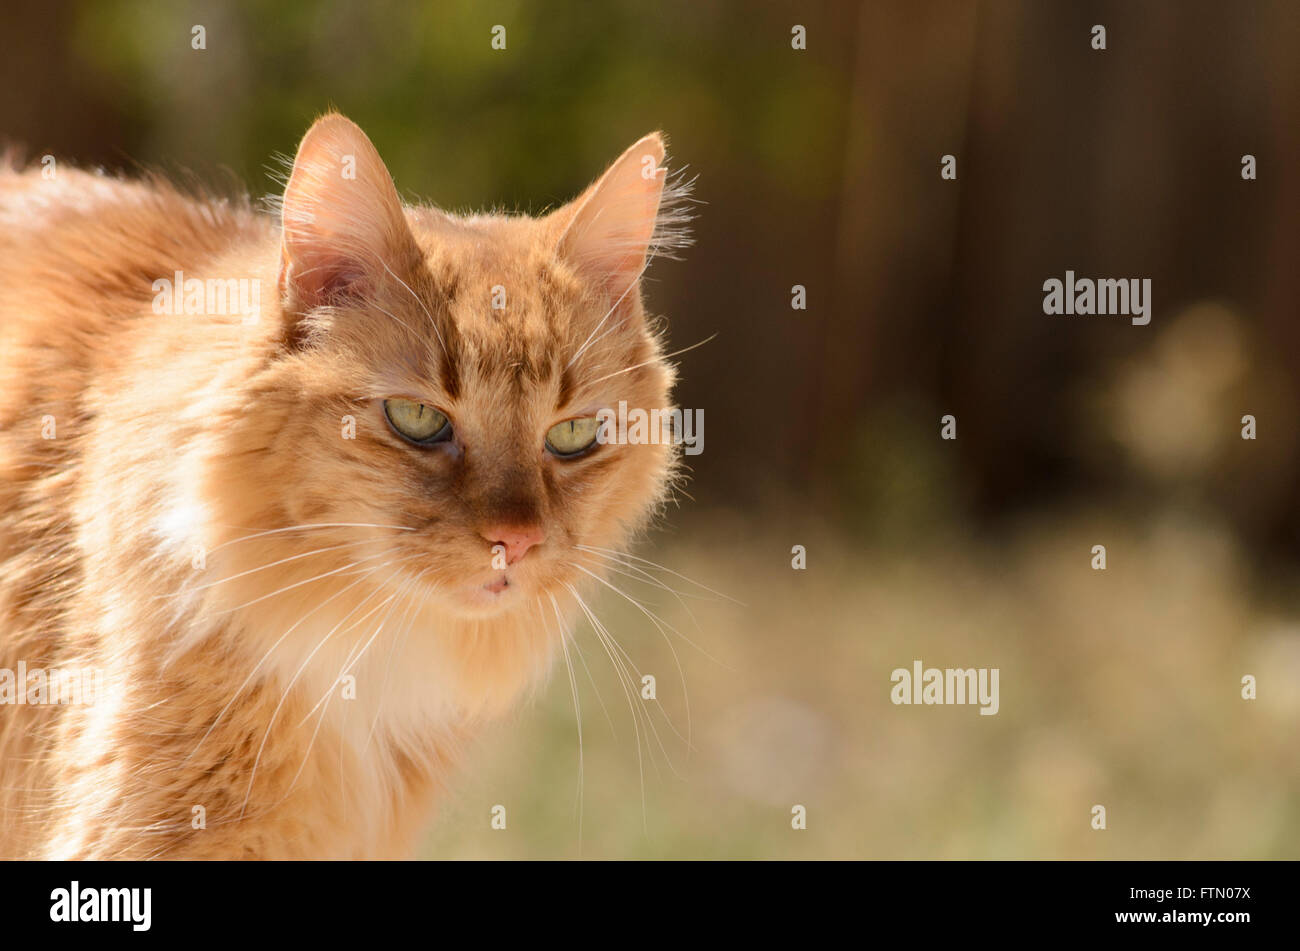 Closeup of tomcat face, orange and white long haired cat. Stock Photo